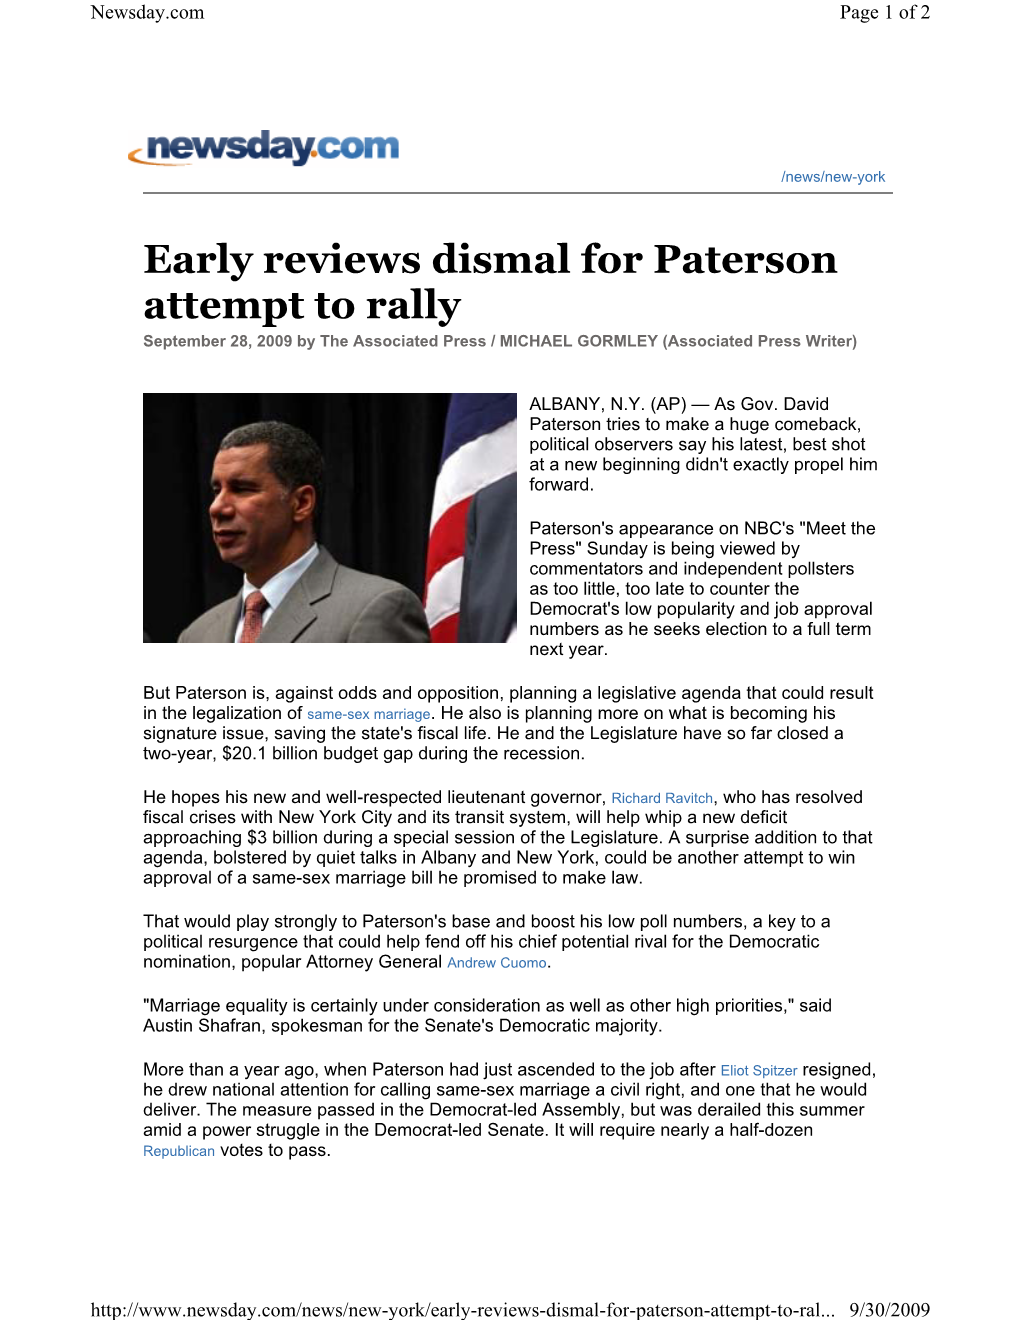 Early Reviews Dismal for Paterson Attempt to Rally September 28, 2009 by the Associated Press / MICHAEL GORMLEY (Associated Press Writer)